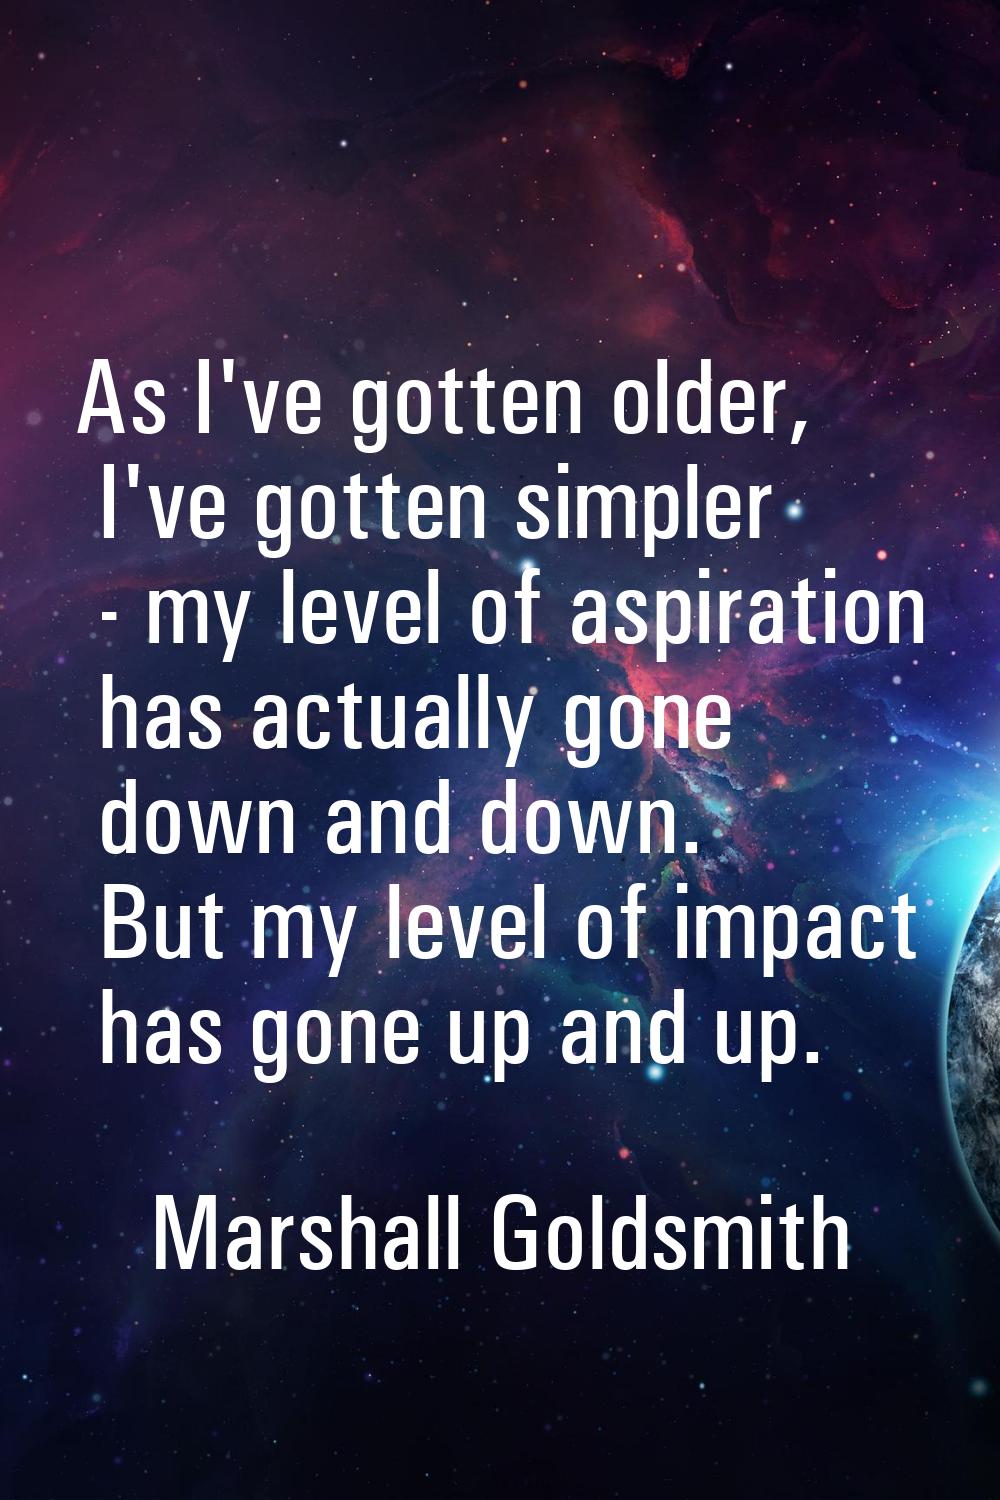 As I've gotten older, I've gotten simpler - my level of aspiration has actually gone down and down.